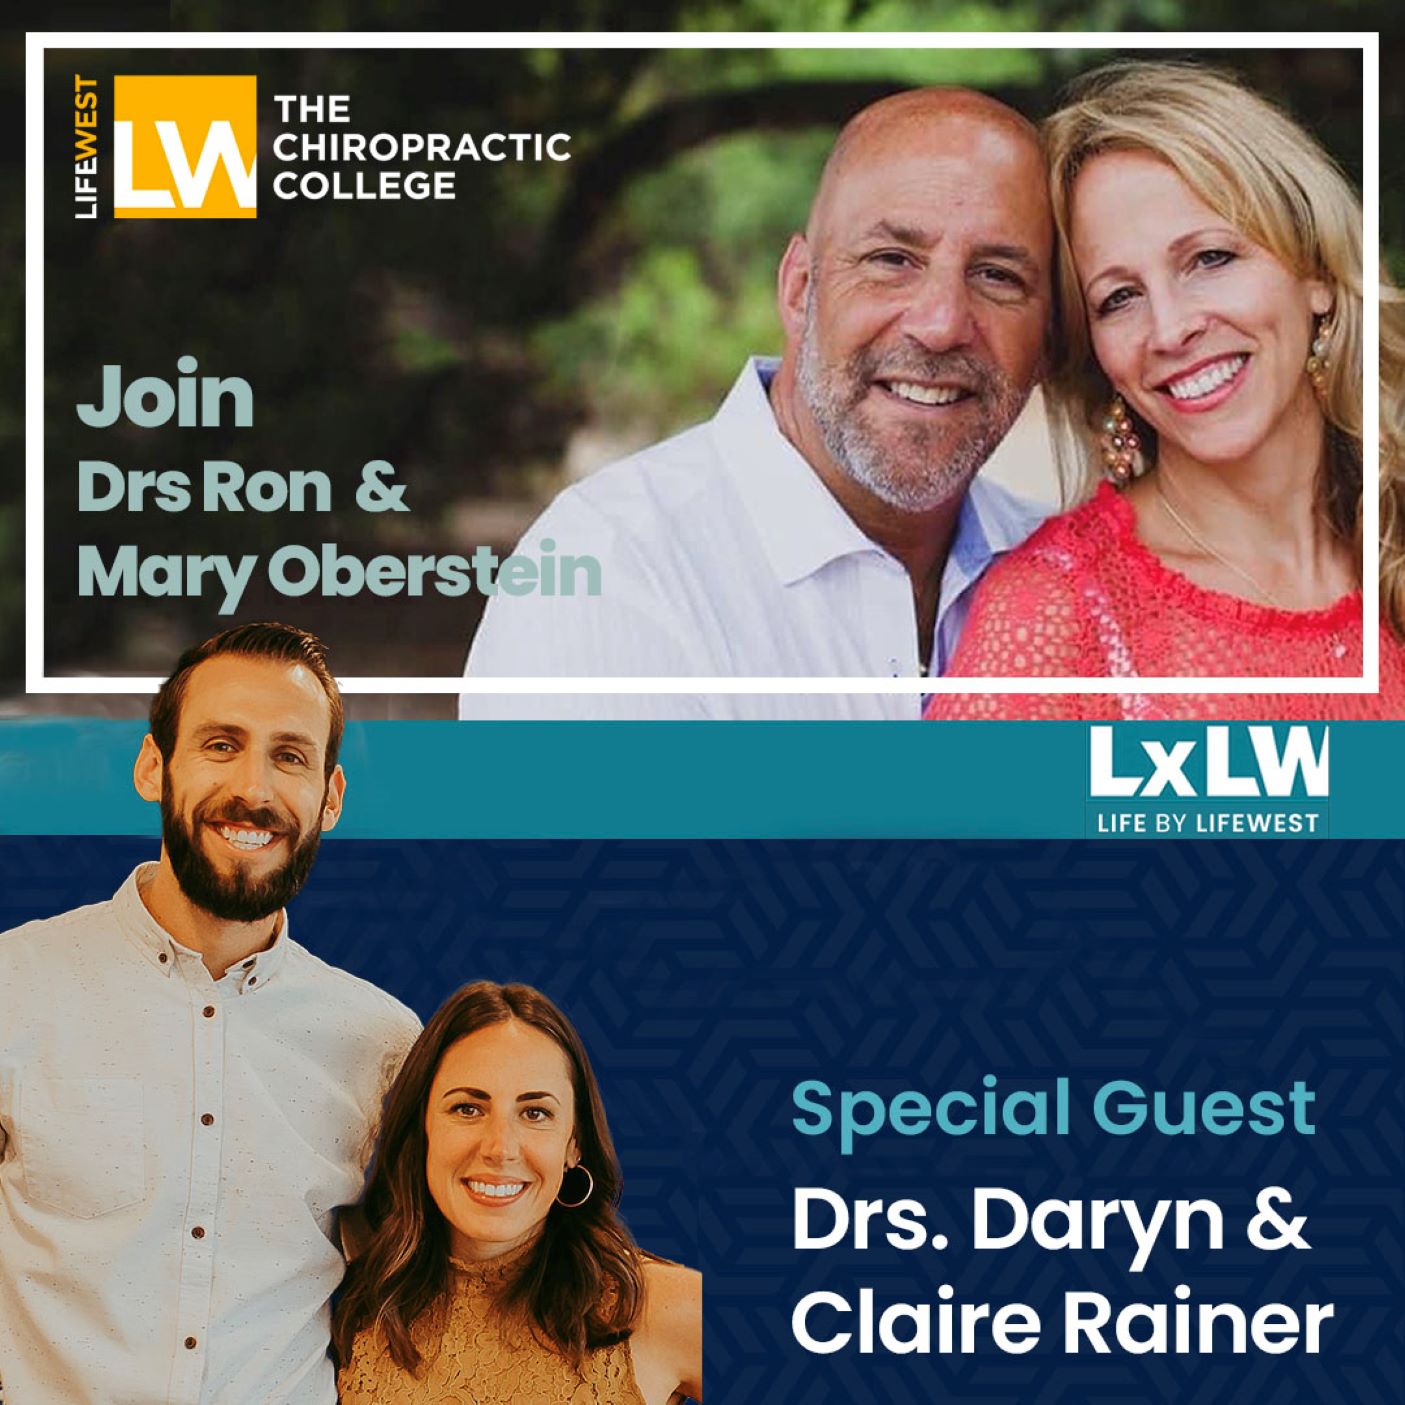 S4 Ep4 See It, Build It, and Let Them Come with Drs. Daryn and Claire Rainer